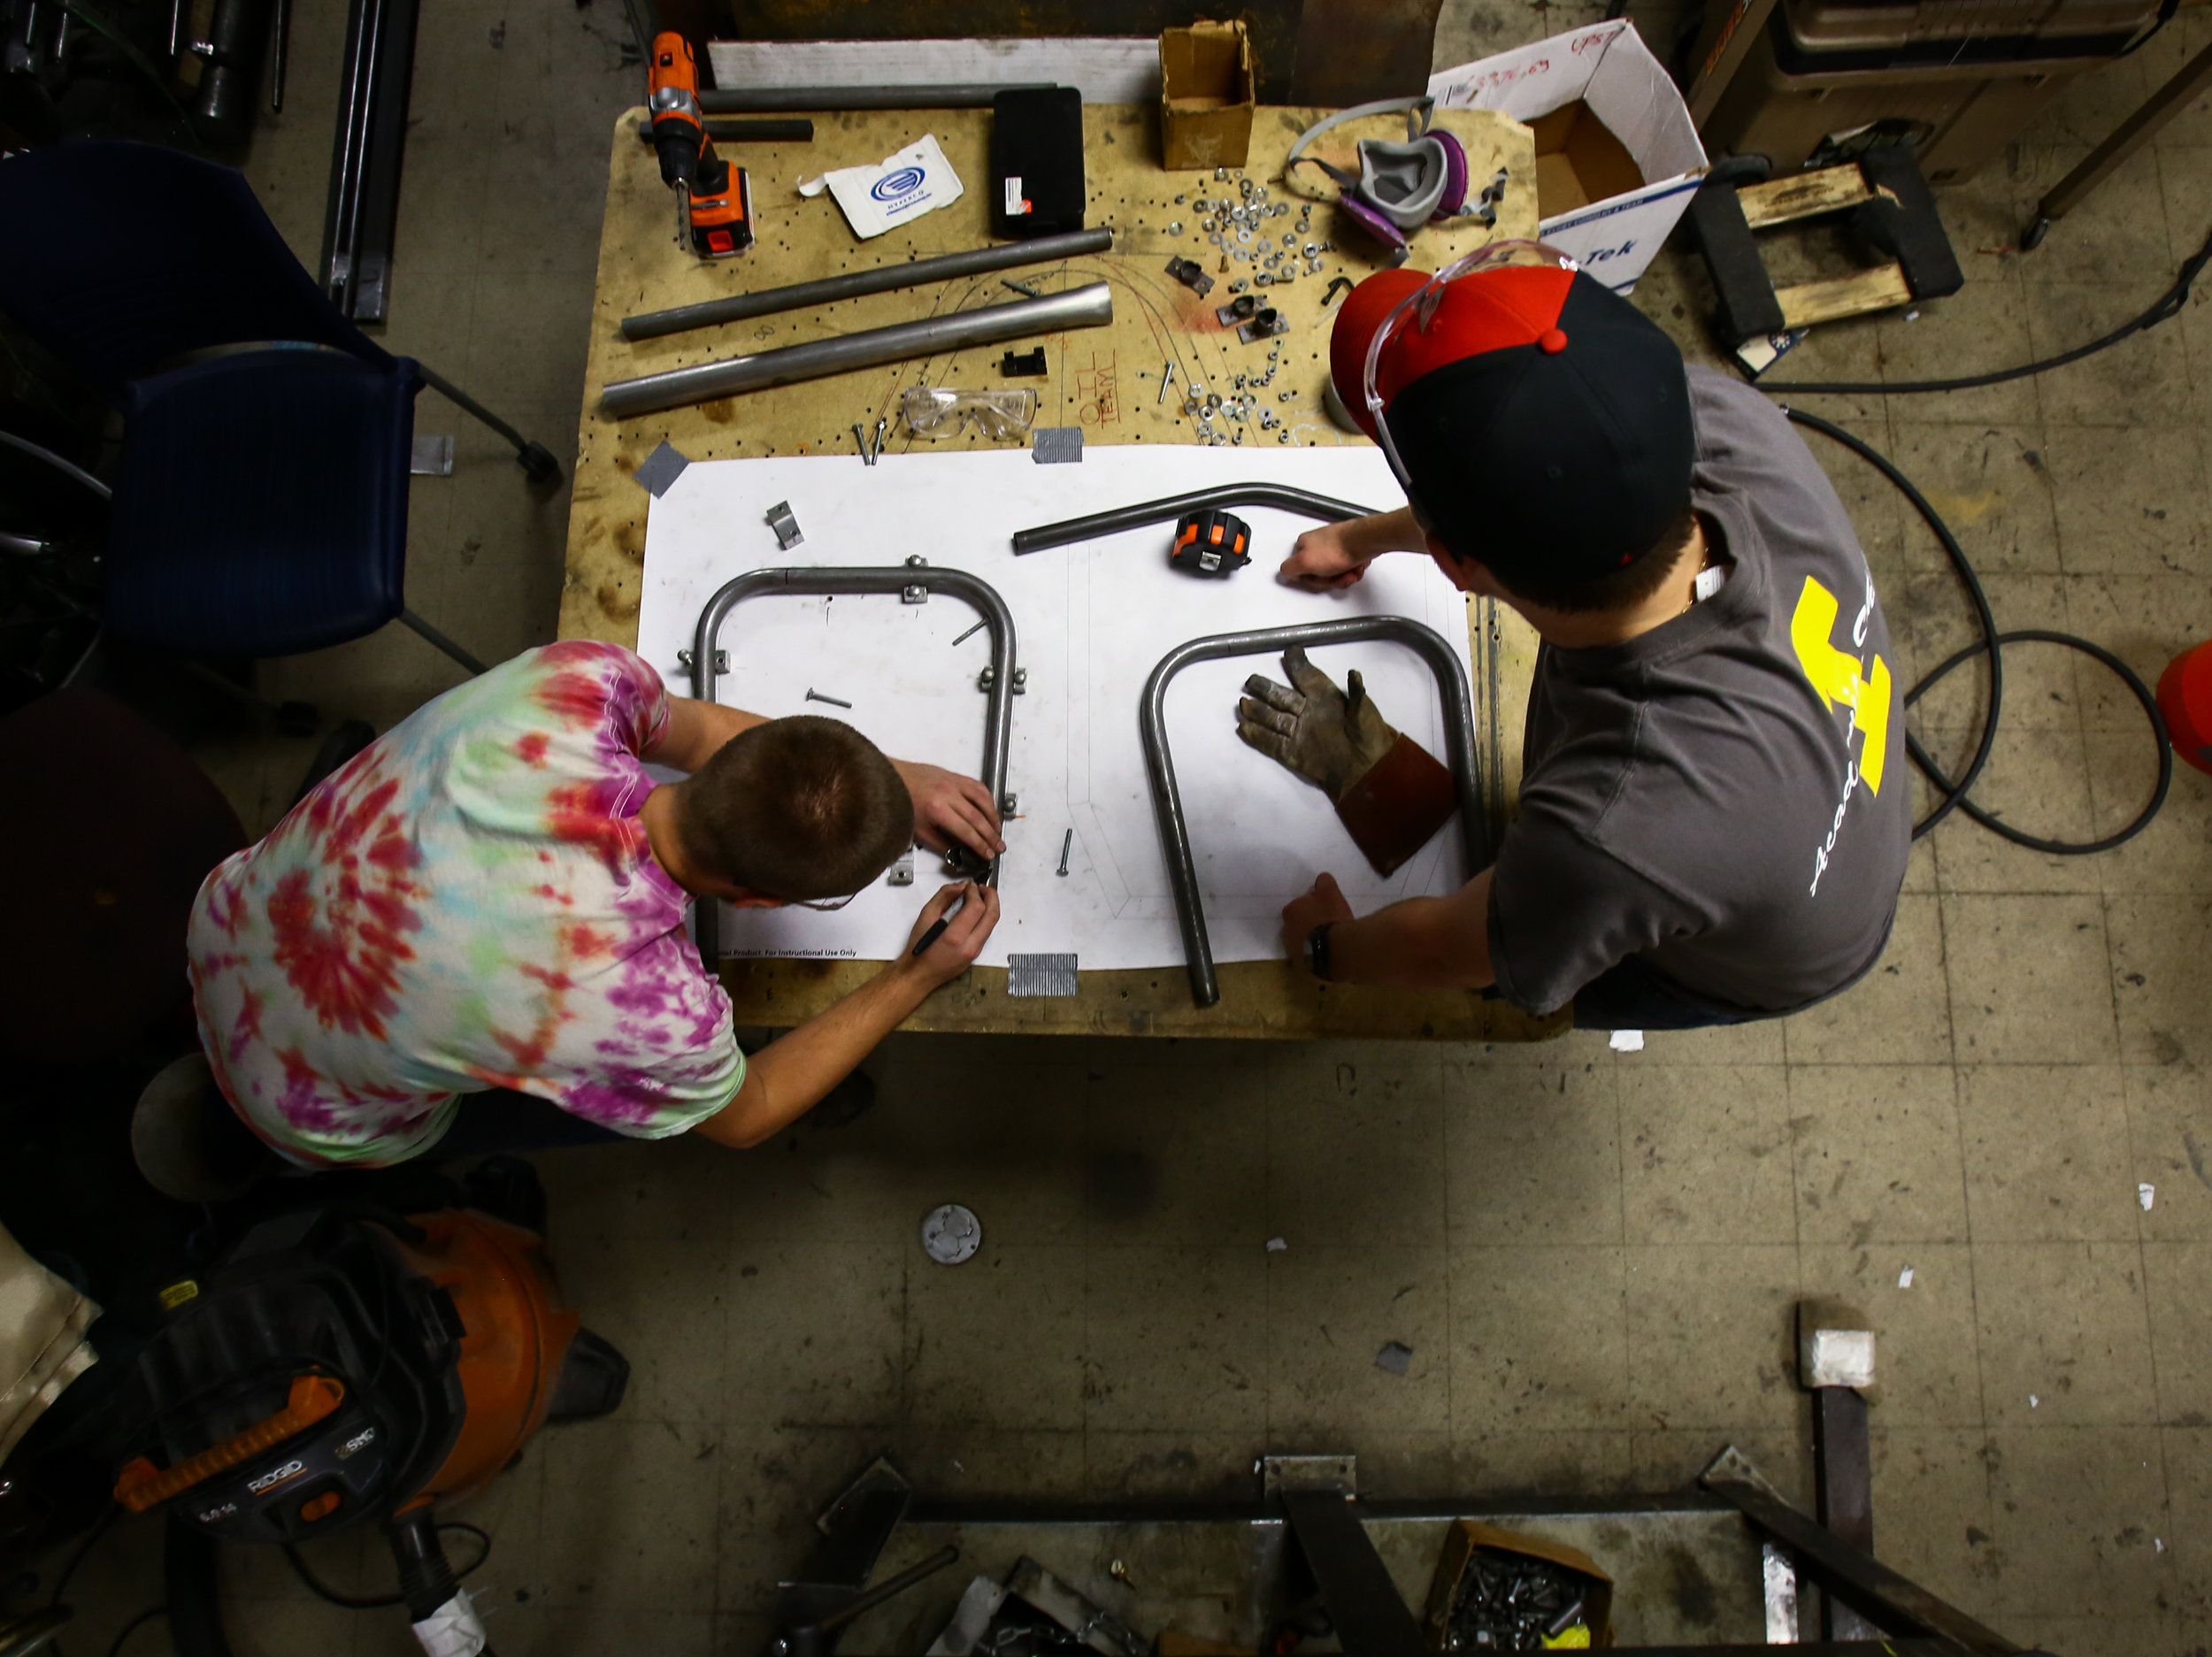  Jared Schaufele, left, and Colin Jedrzejek work on marking and cutting tubing to weld together the front bulk head as they begin to construct the chassis for the current season’s car in the Formula SAE team lab in the University of Toledo’s North En